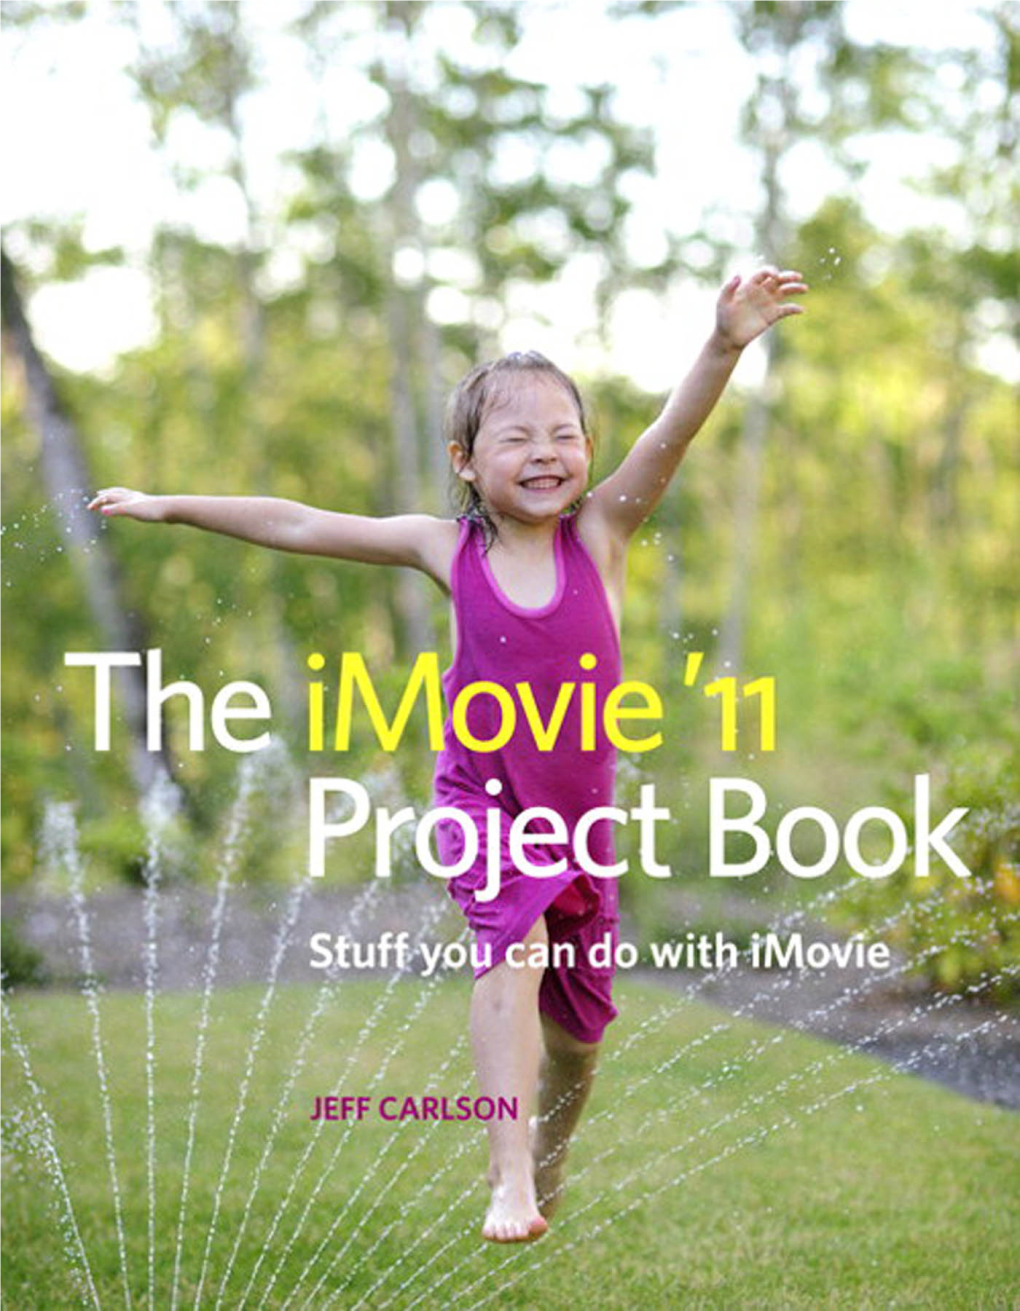 The Imovie ’11 Project Book Stuff You Can Do with Imovie